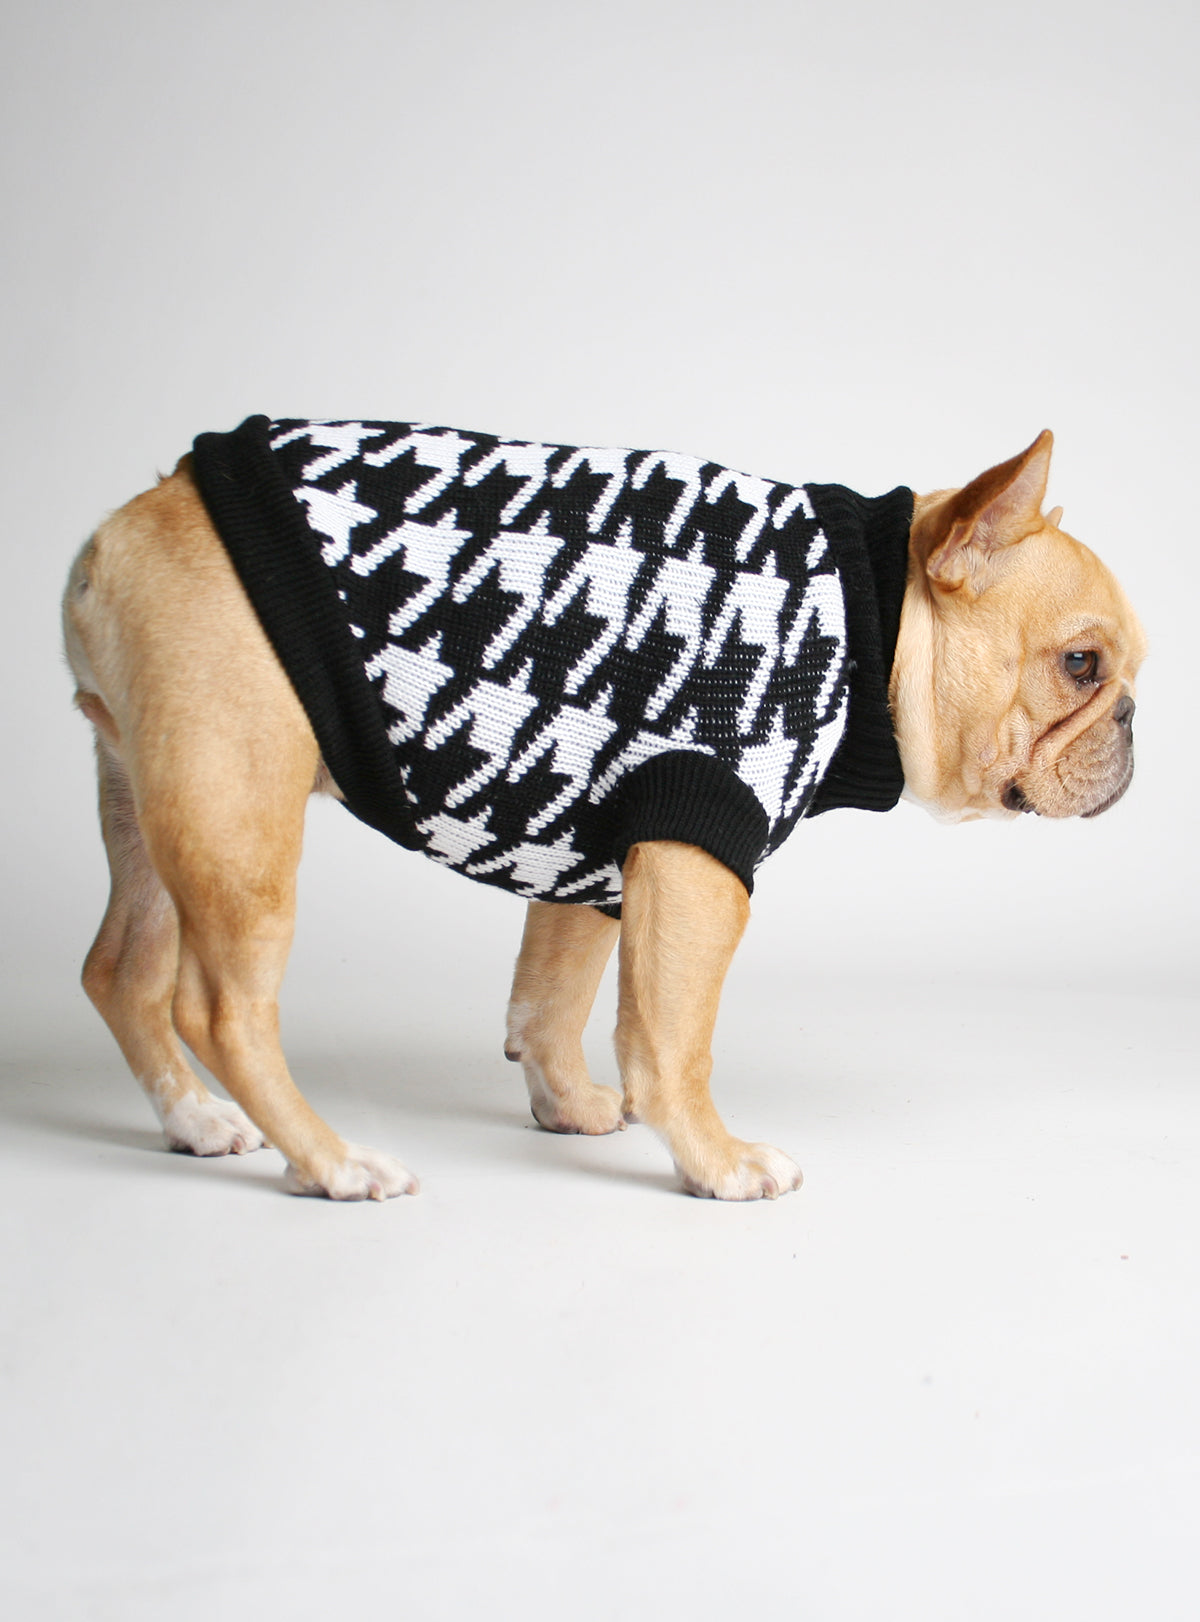 The Whiteout Dog Sweater